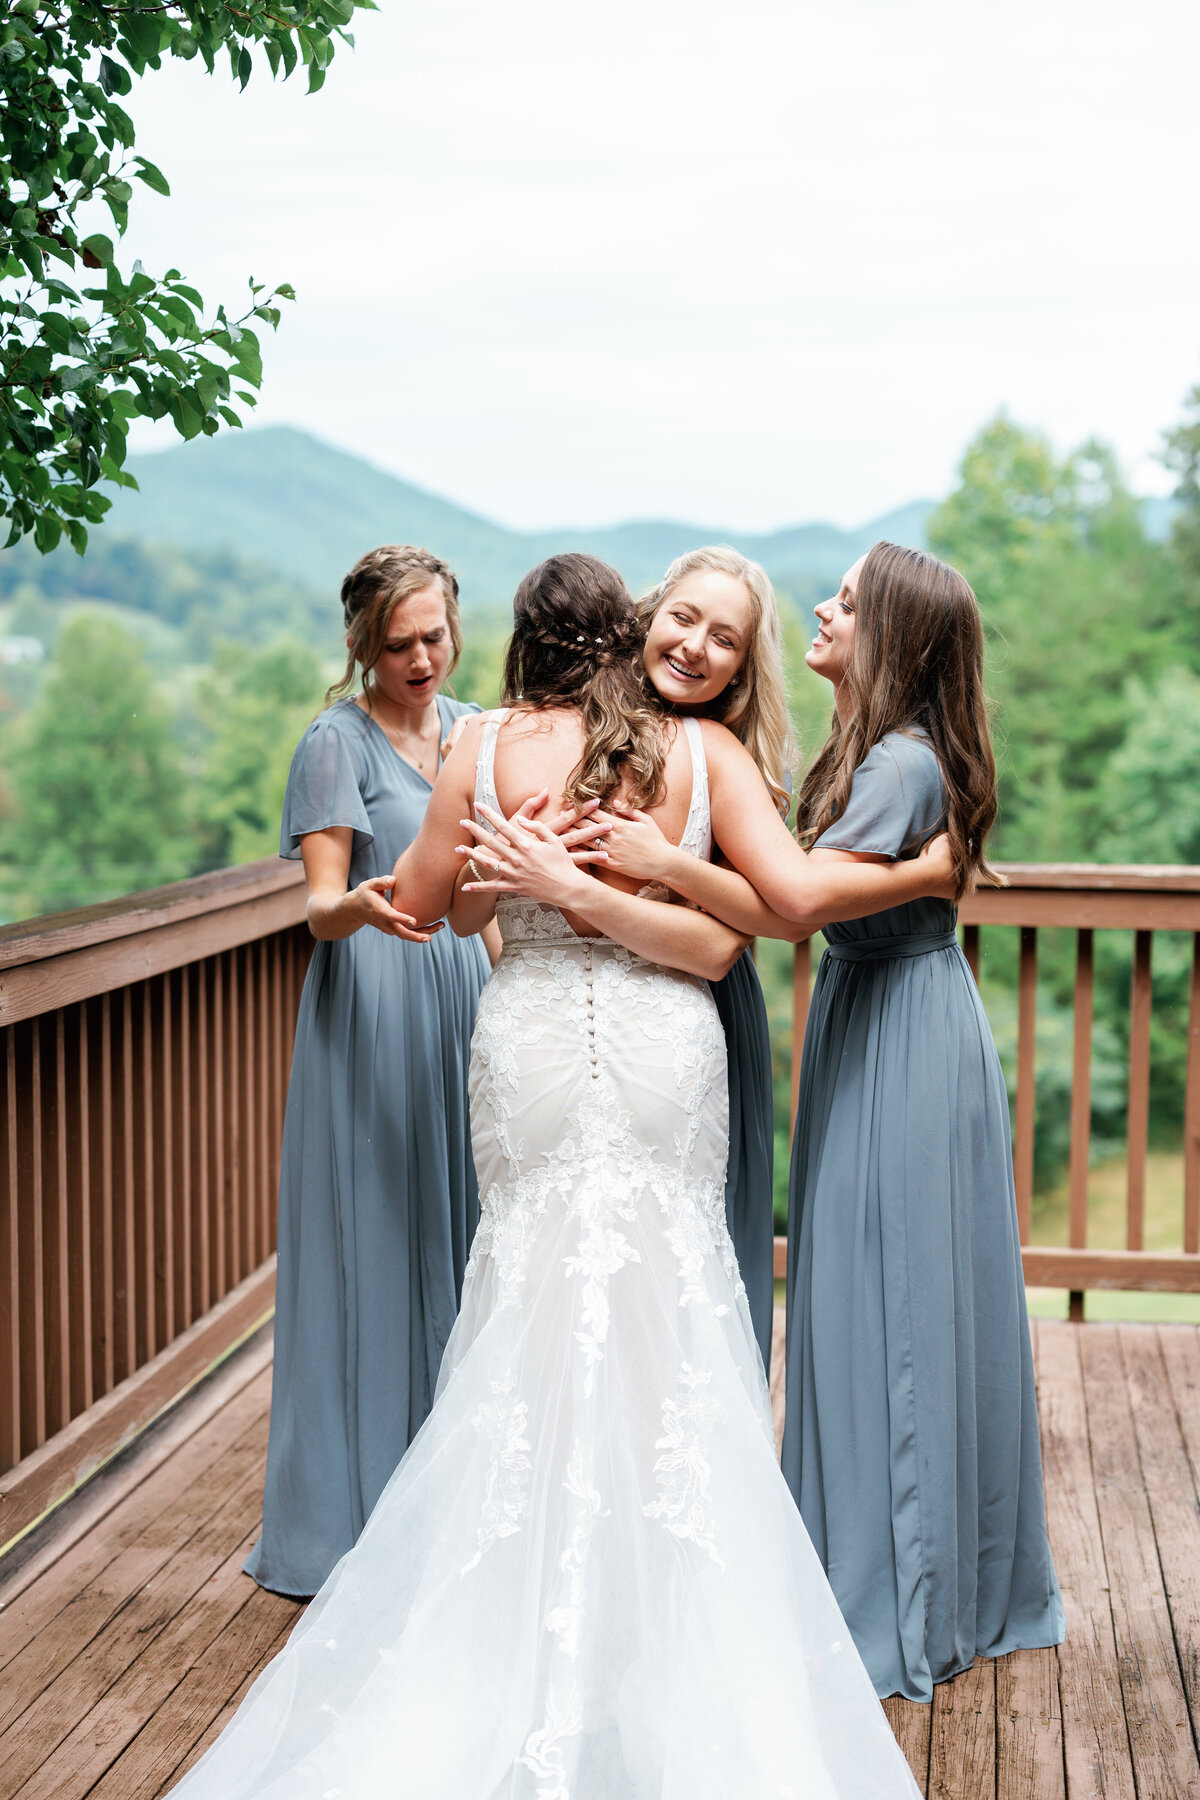 Alaina and Russ - Coopers Cove at Heritage Park - East Tennessee Wedding Photographer - Alaina René photography-494